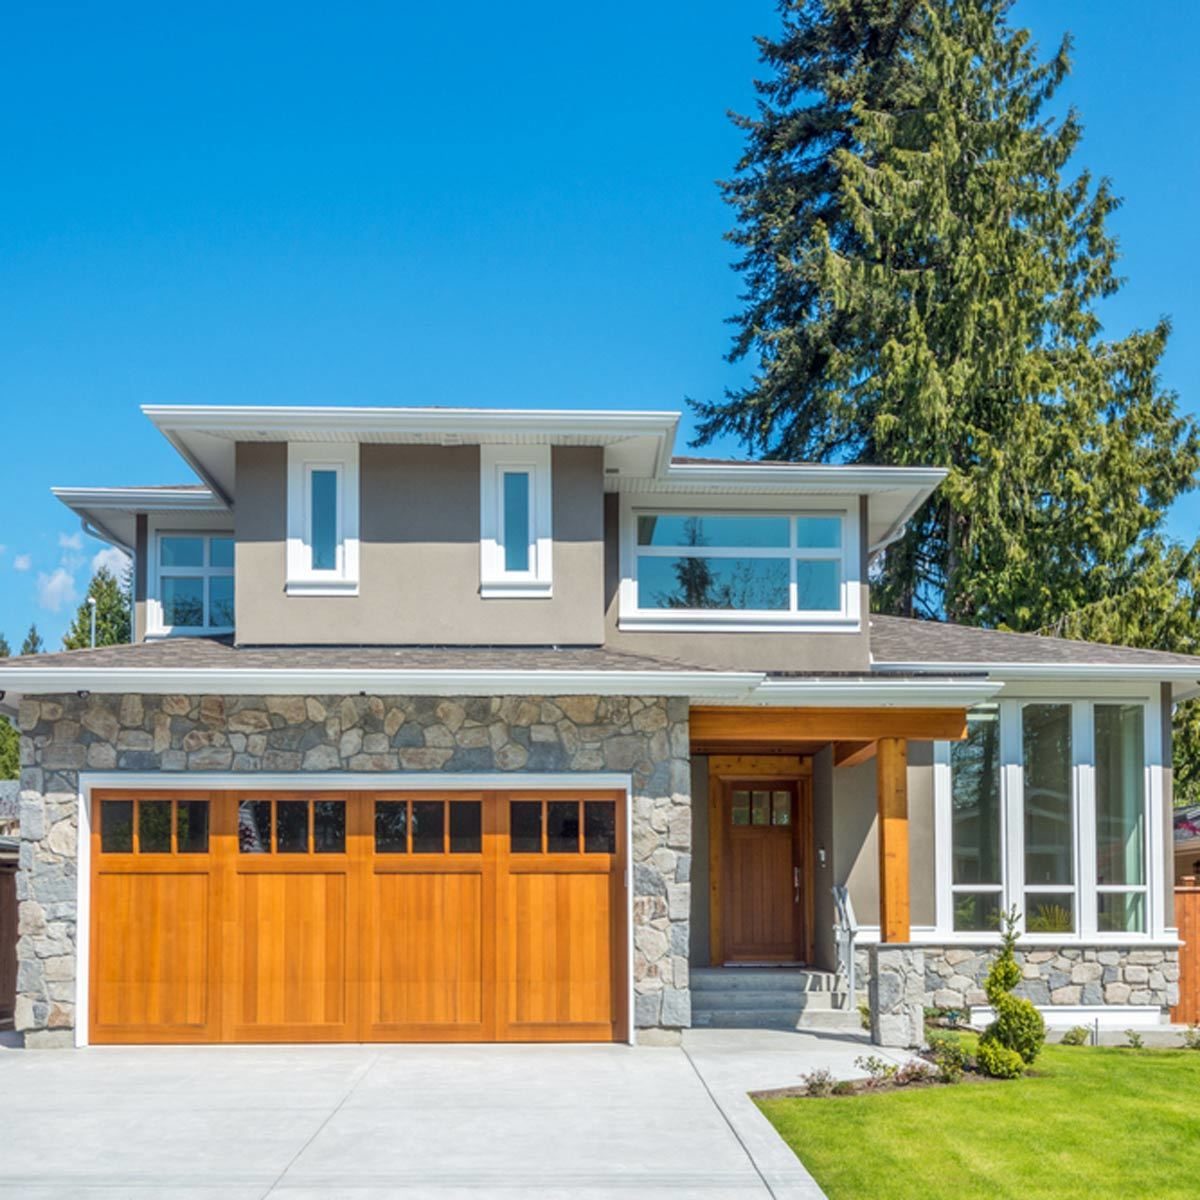 17oct94-2018_271404422_04-house-color-1200x1200 home exterior with wooden garage doors